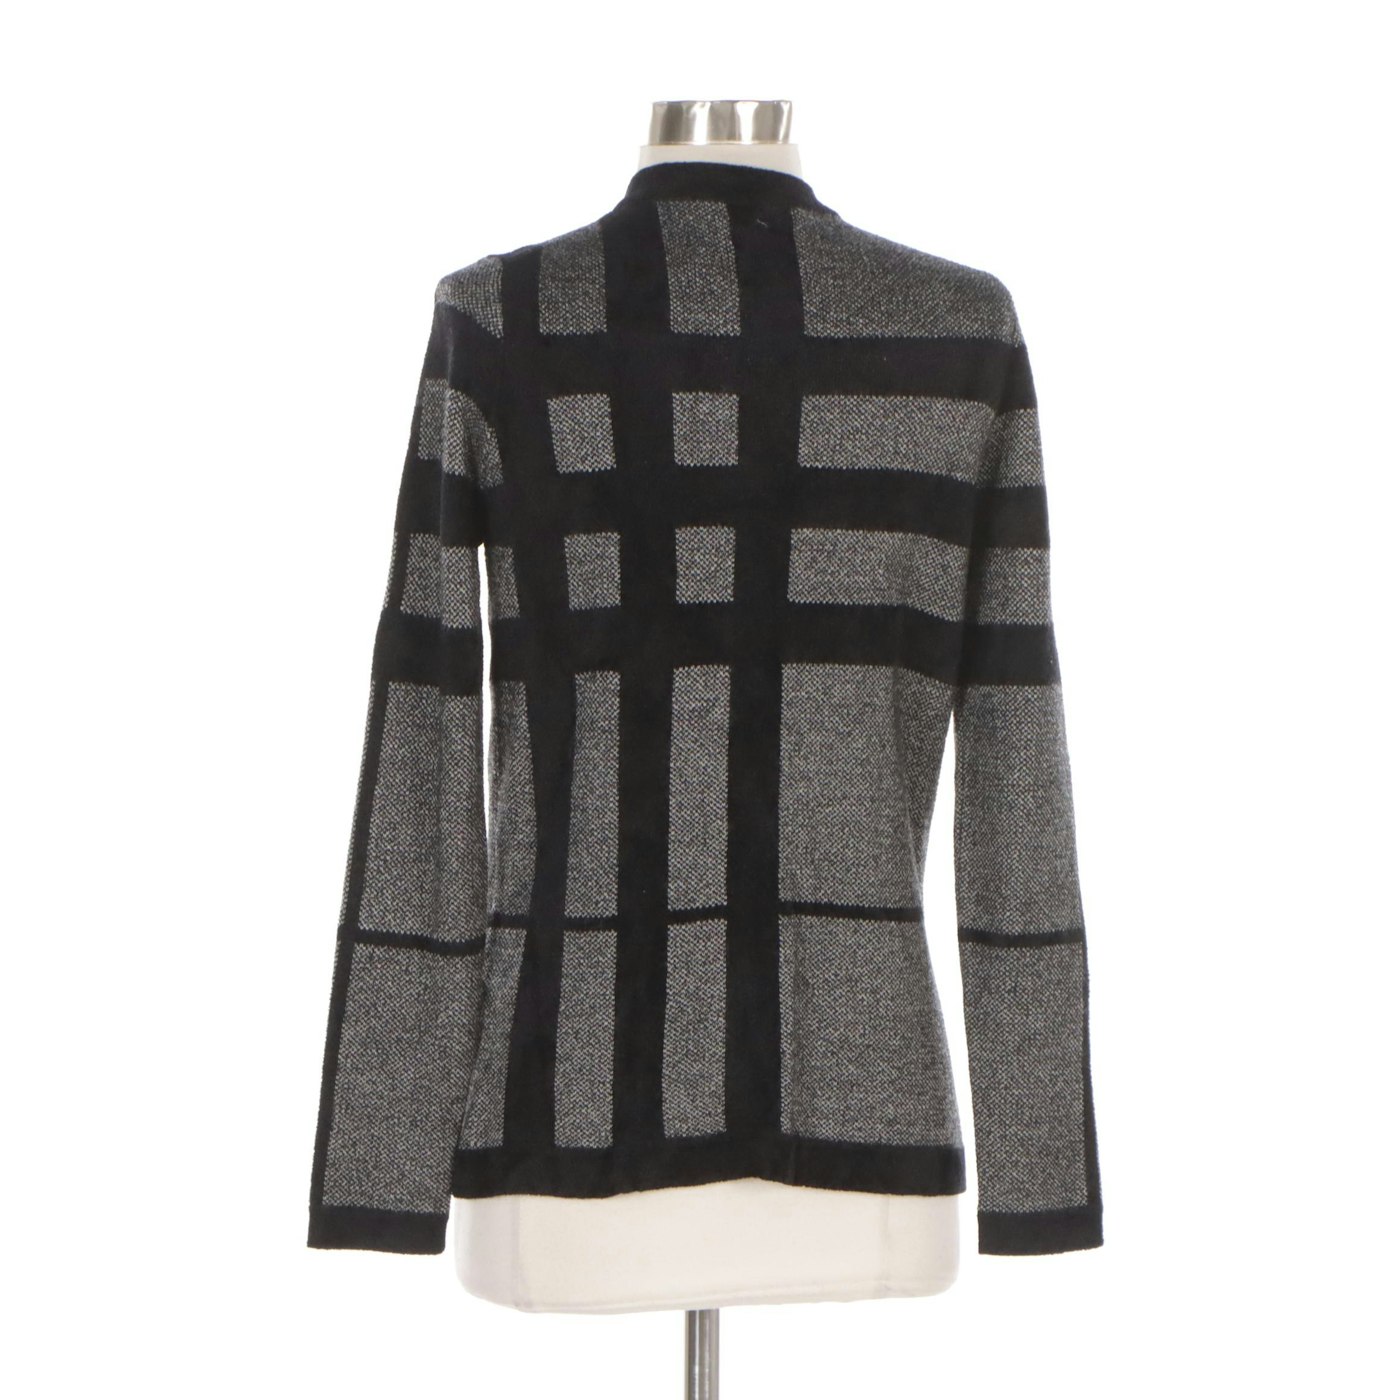 Burberry Red Label Cardigan Sweater in Black and Grey Checked Wool and ...